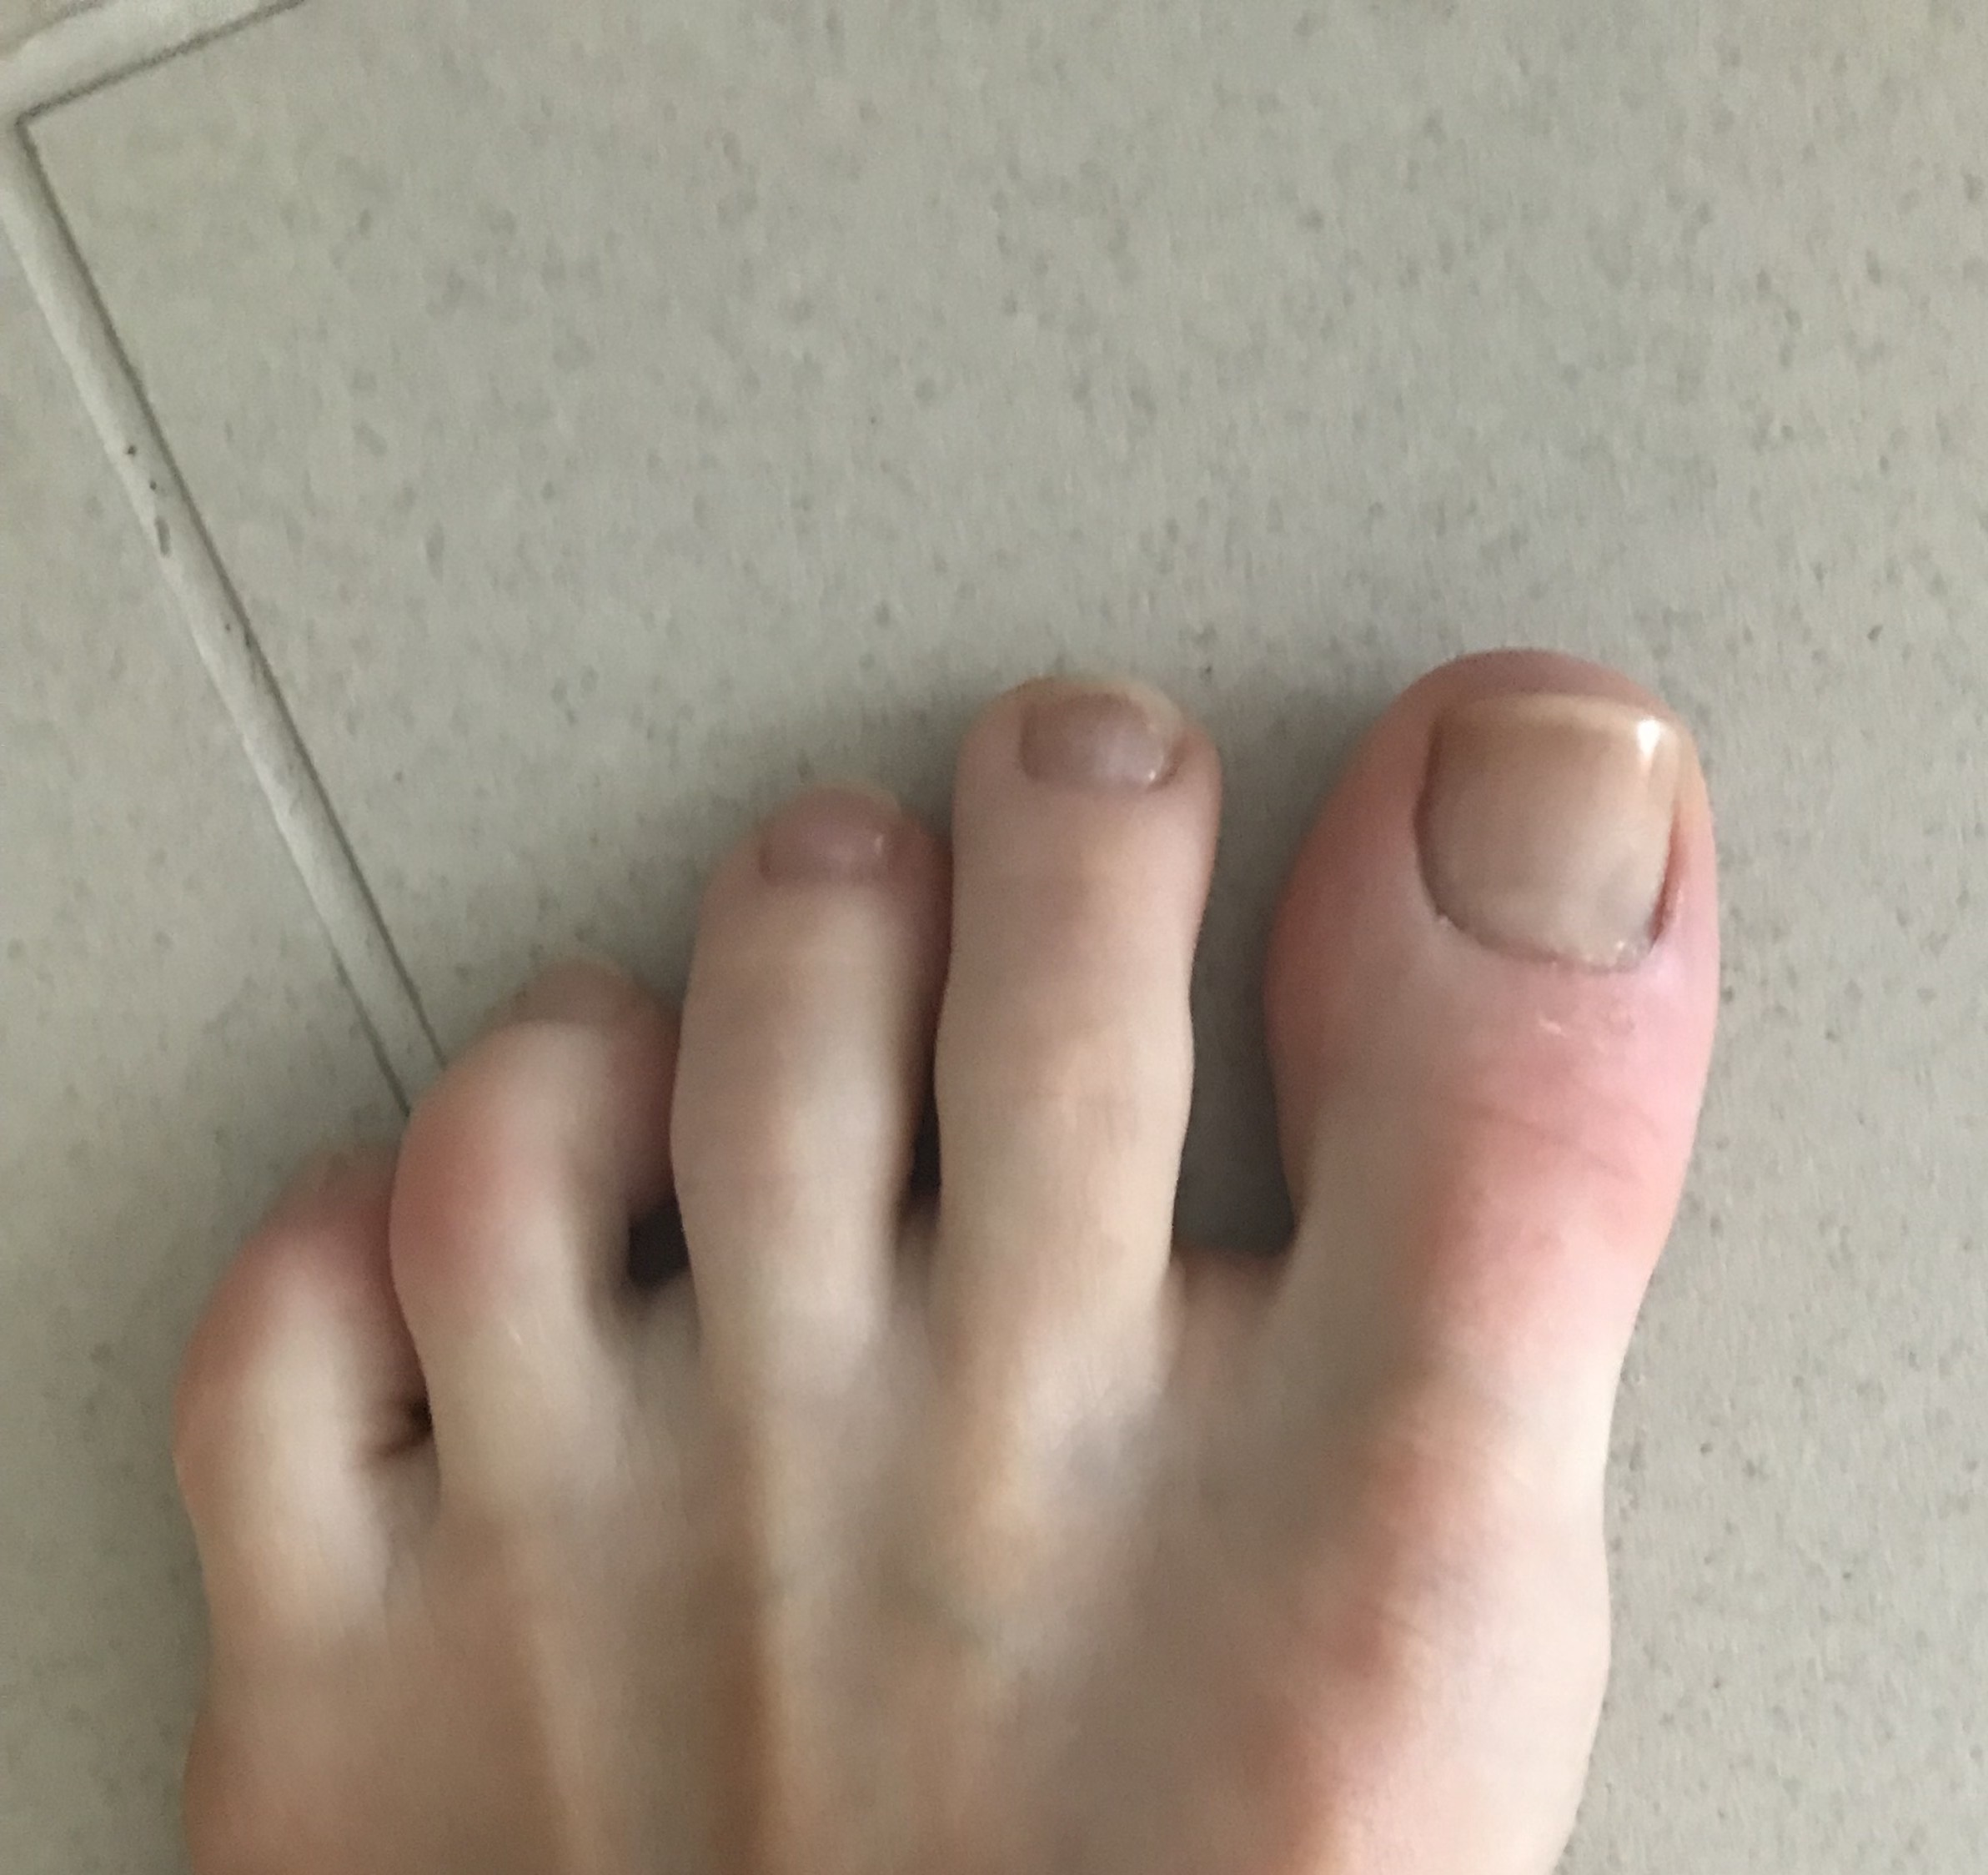 Fungal Nails: See some real results - Footpoint Podiatry